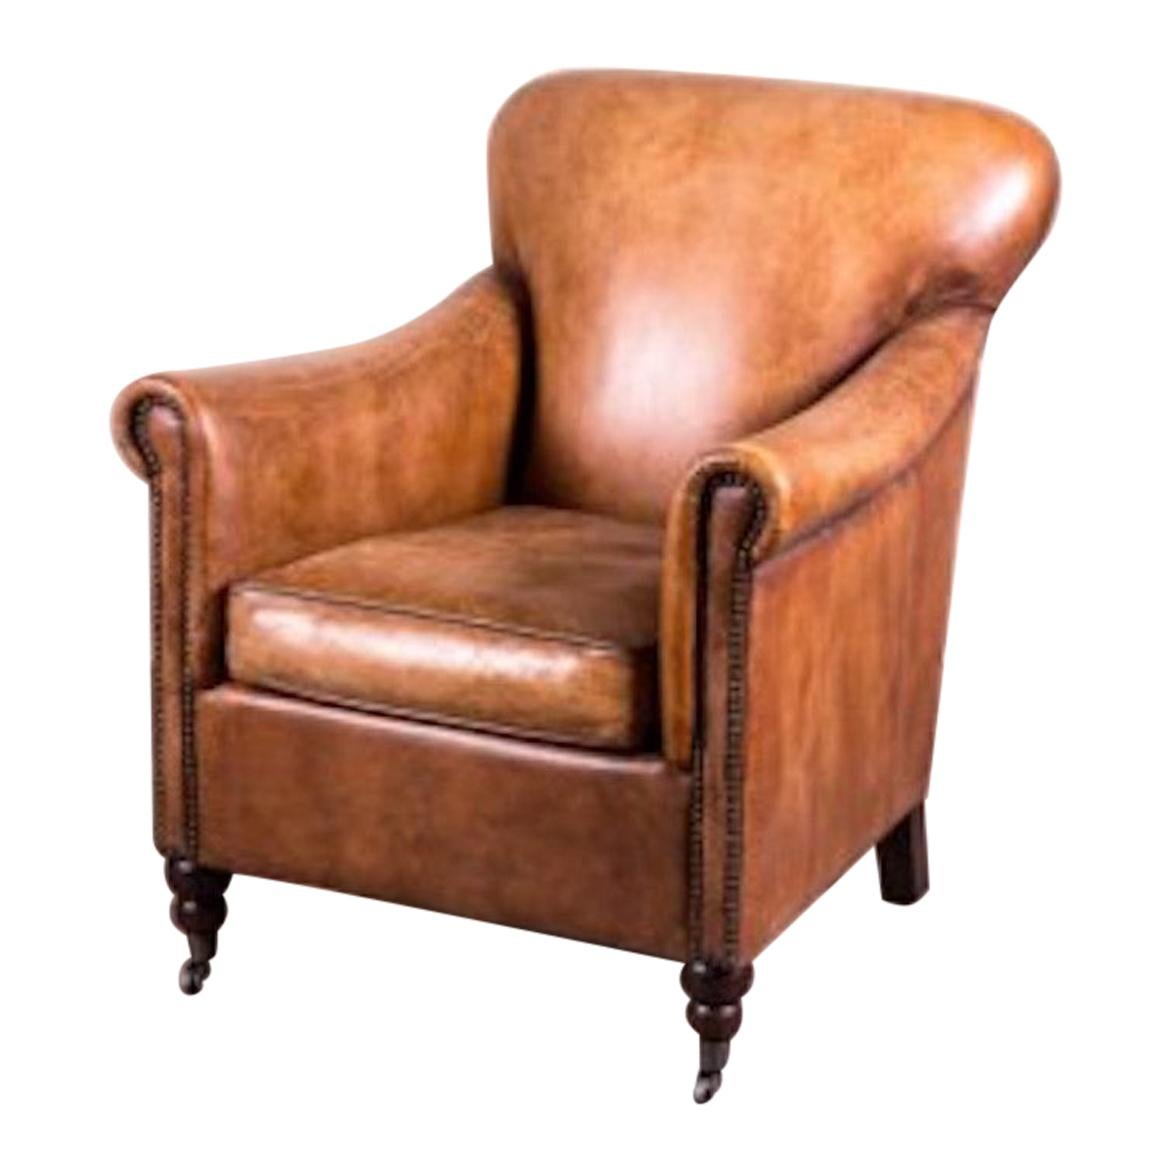 Lansdowne Vintage Style Tan Leather Armchair, 20th Century For Sale